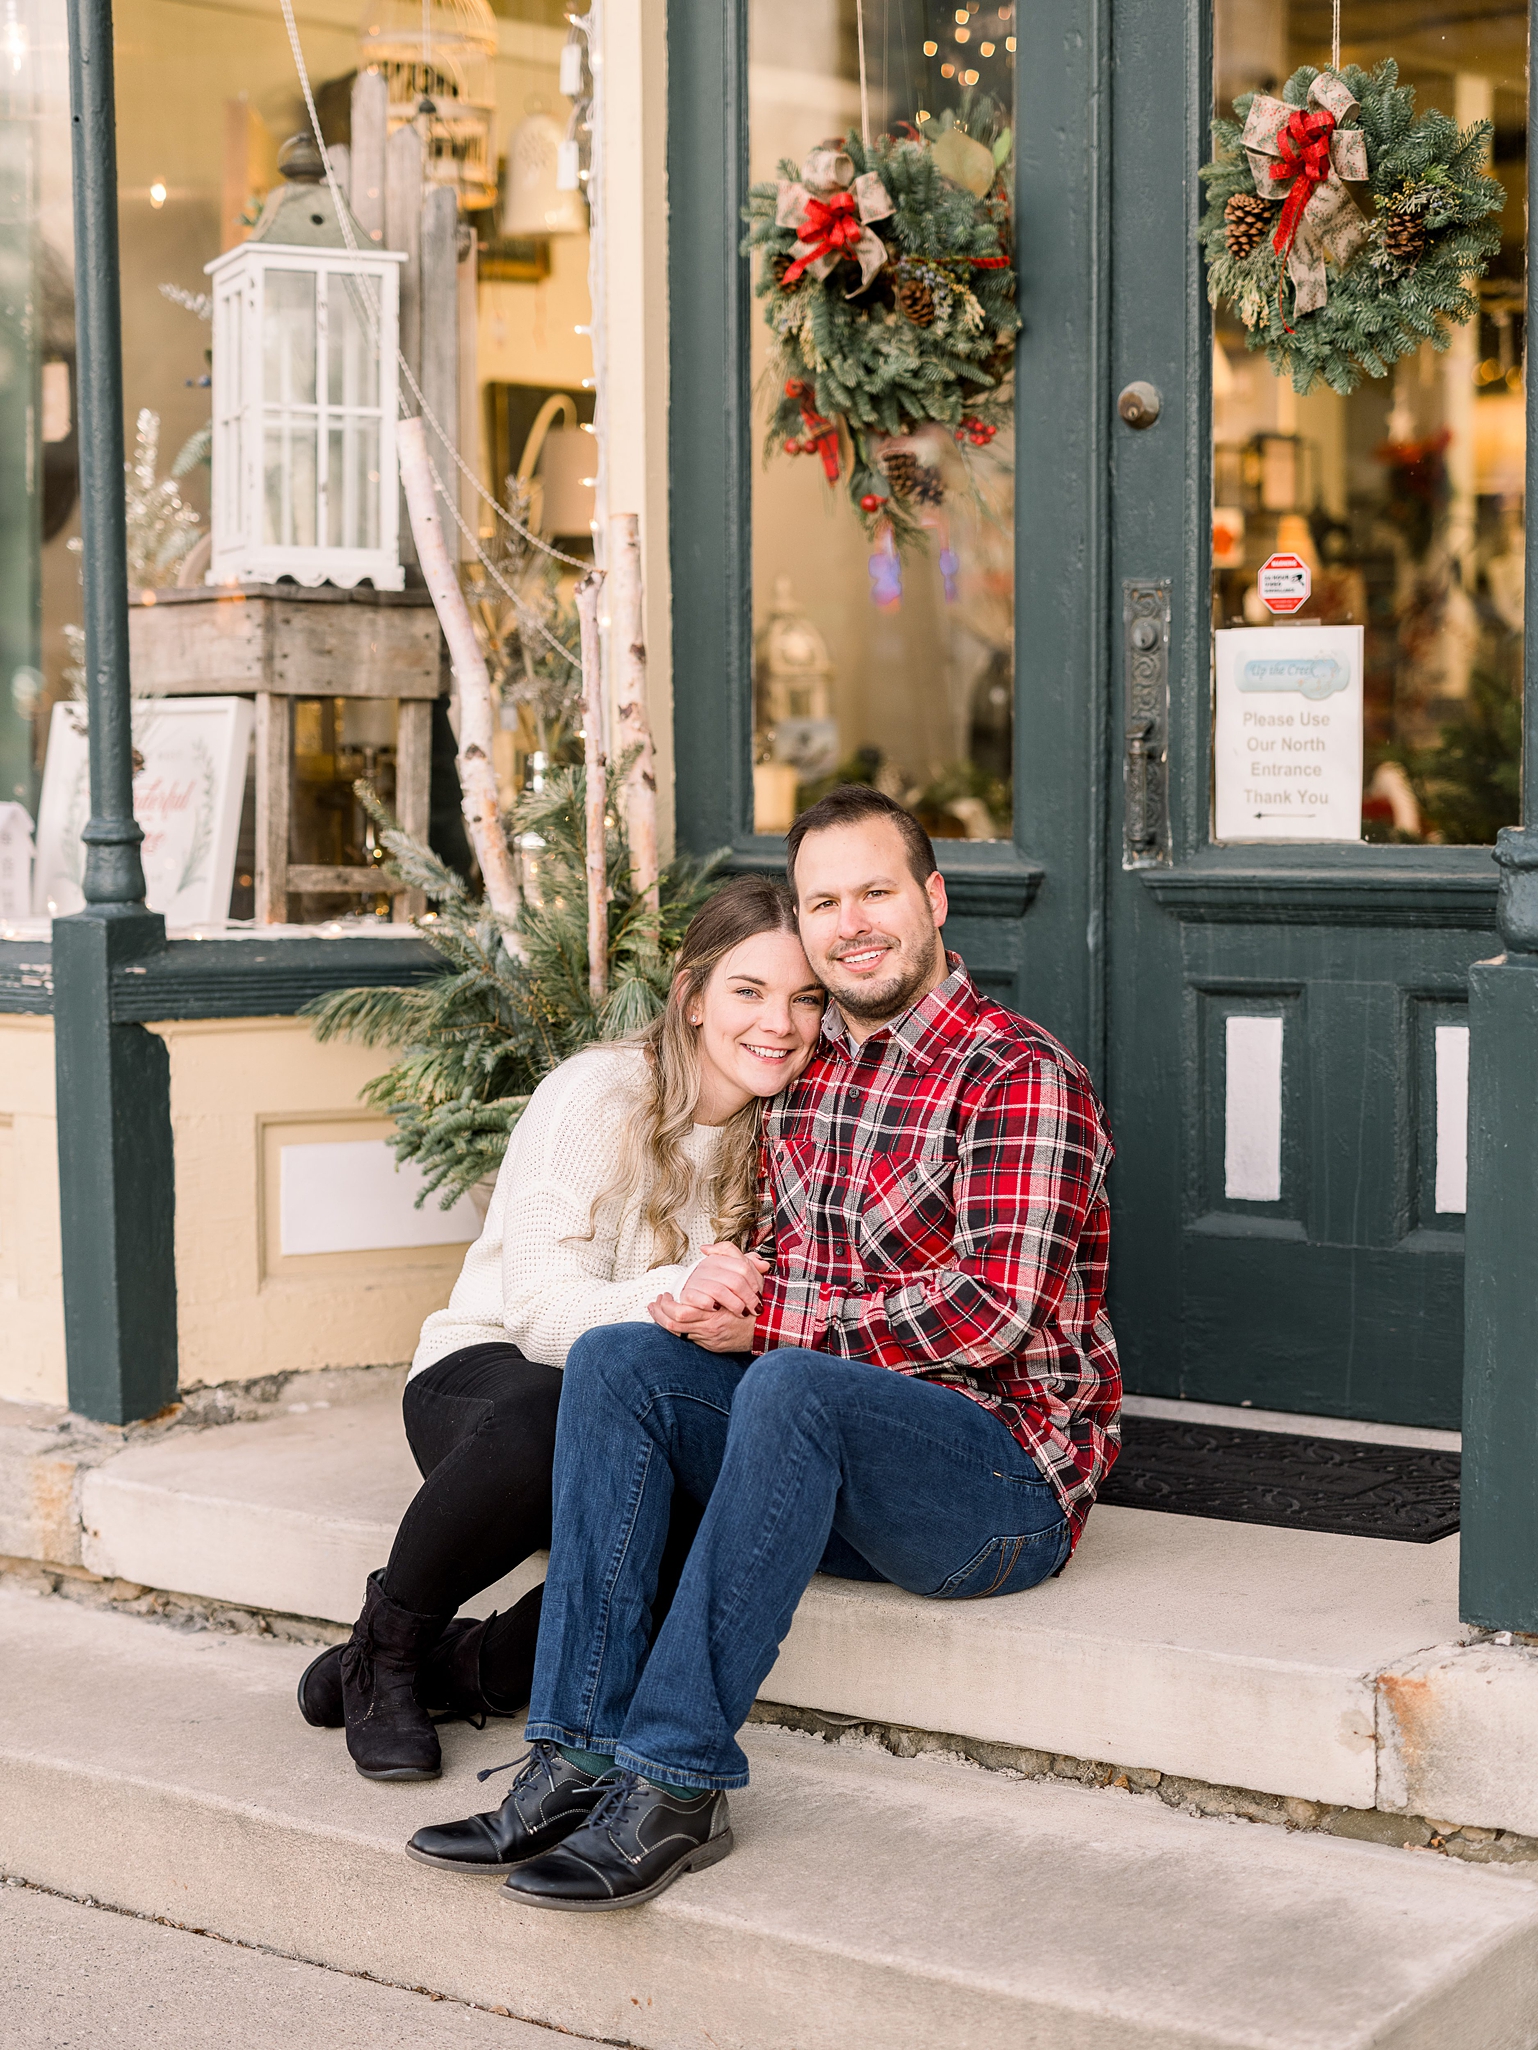 Downtown Cedarburg, WI Winter Engagement Session